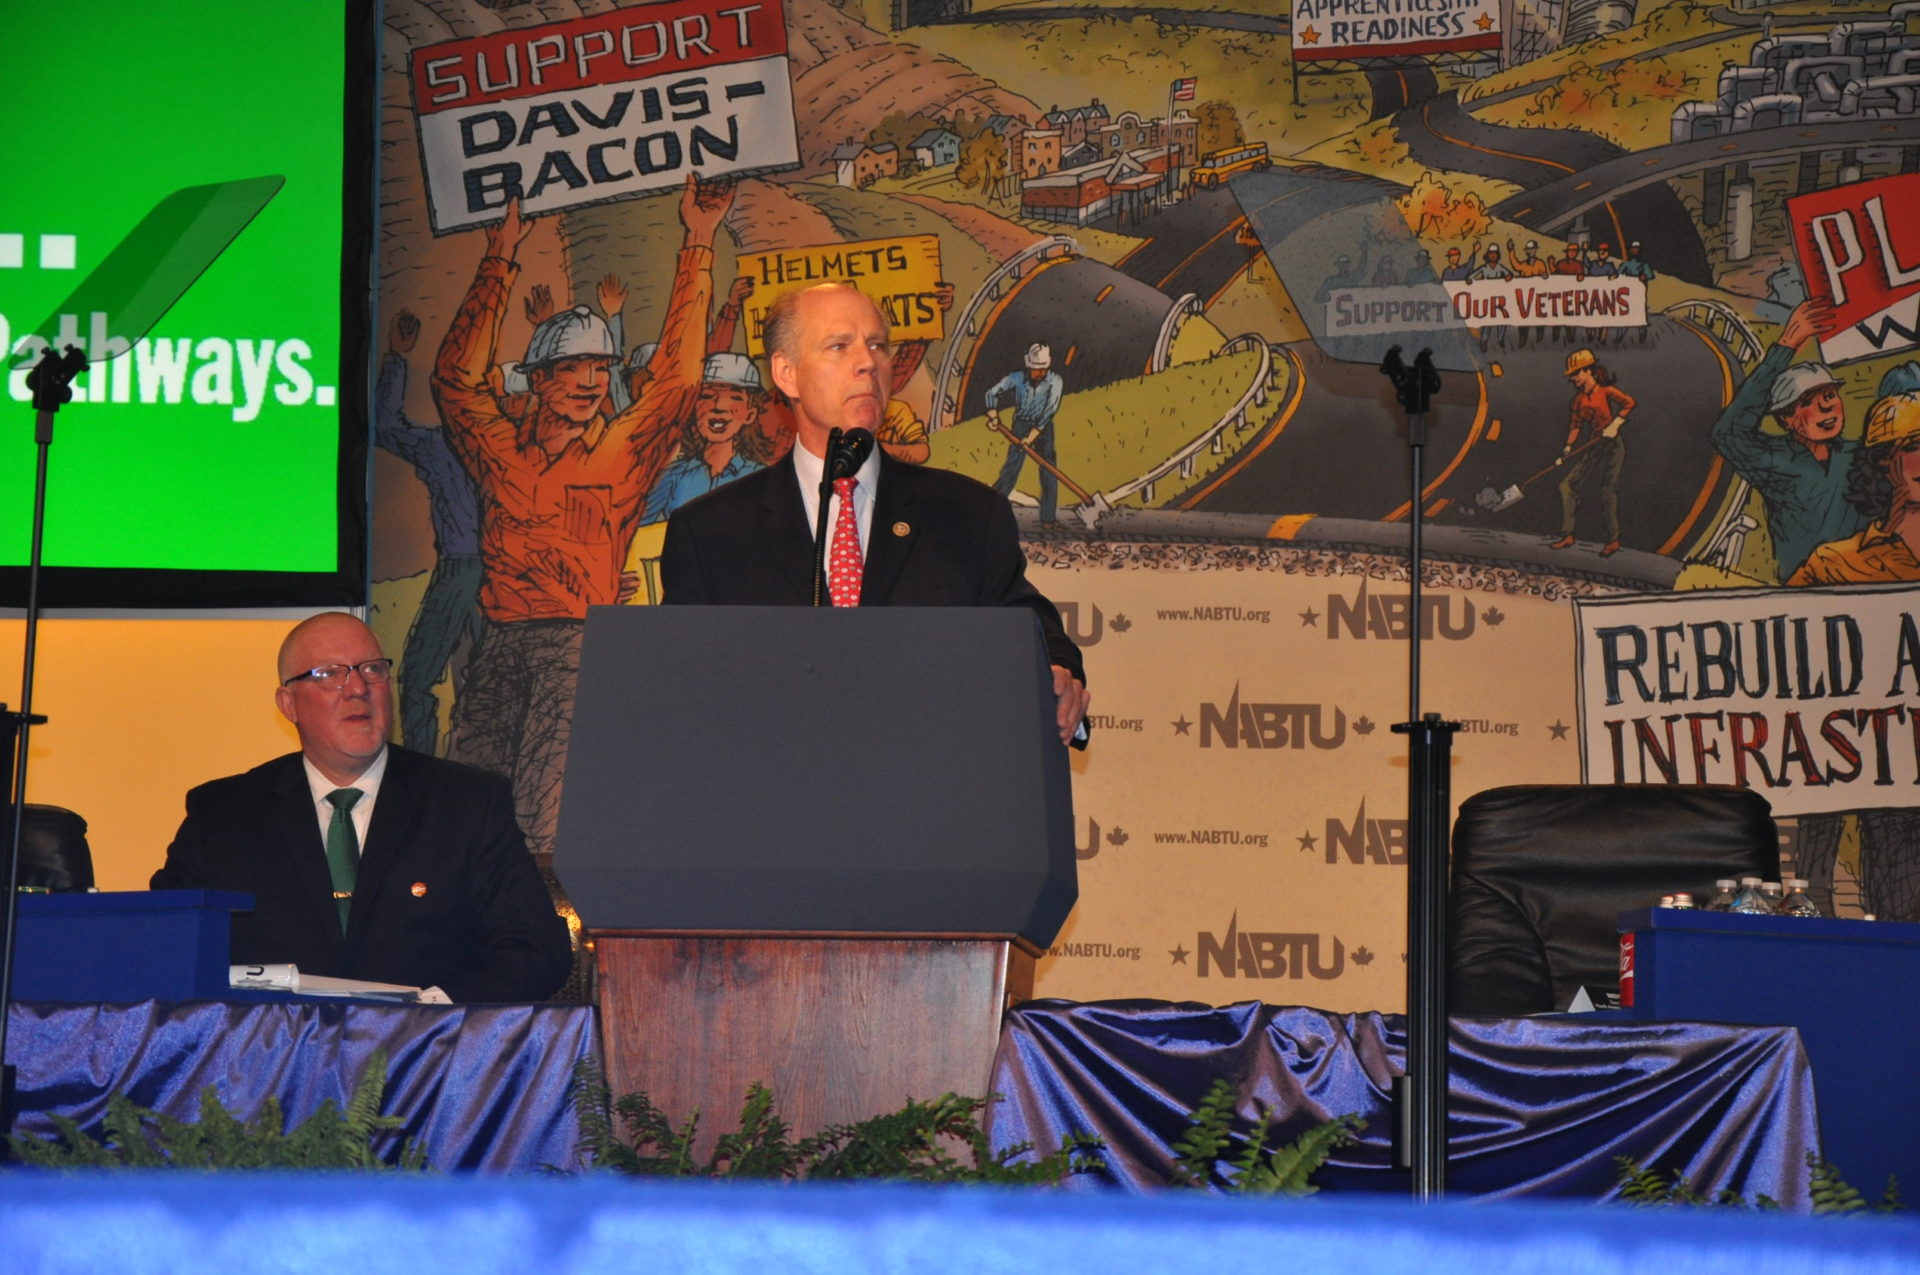 Image from the Gallery: North America’s Building Trades Unions: NABTU – Washington, DC